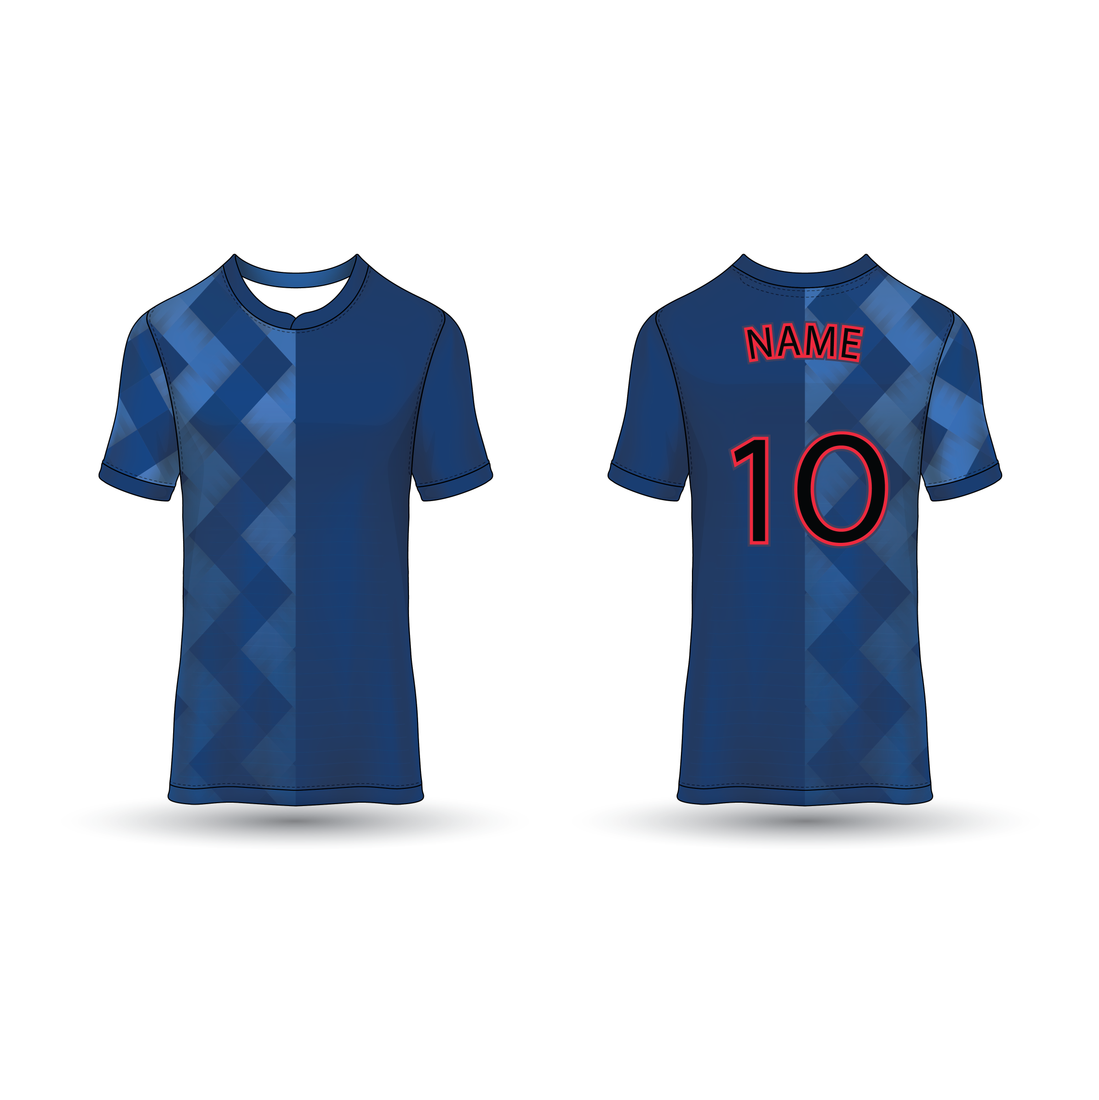 NEXT PRINT All Over Printed Customized Sublimation T-Shirt Unisex Sports Jersey Player Name & Number, Team Name NP50000228